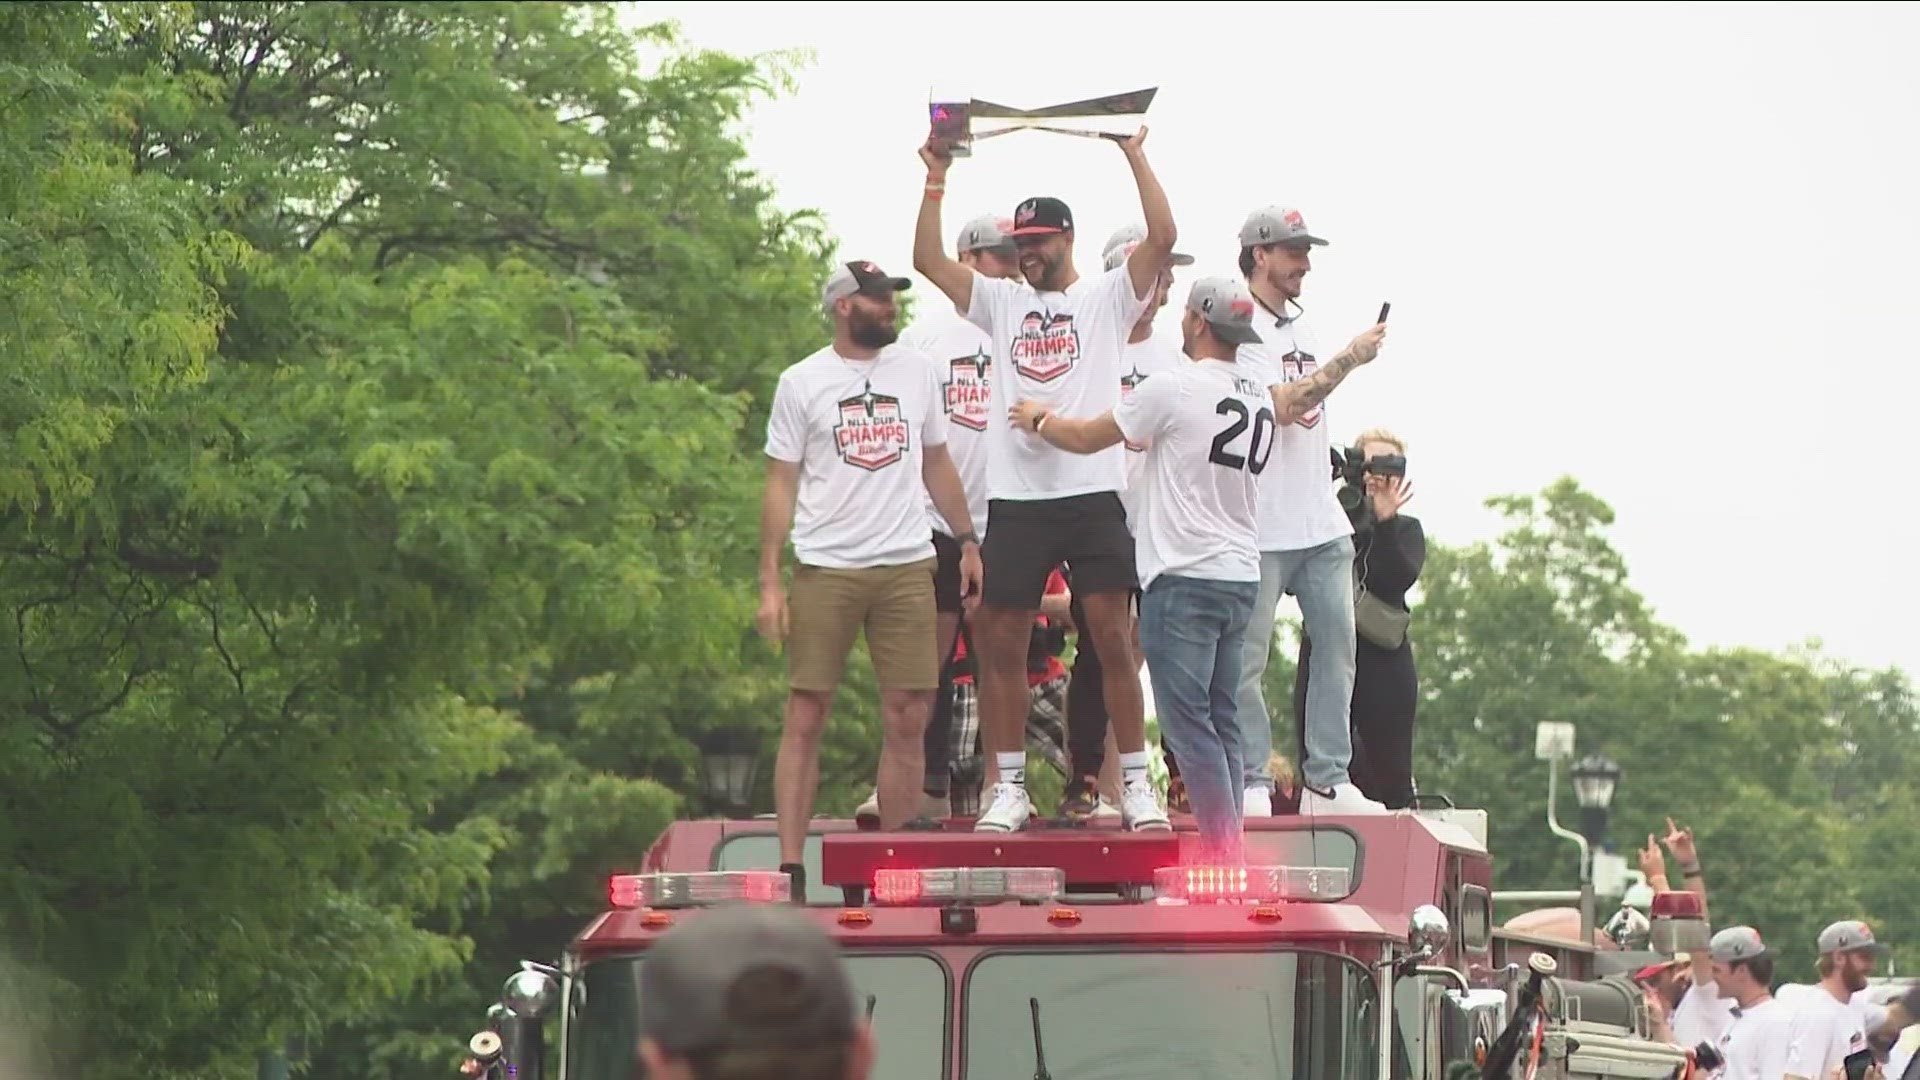 Buffalo Bandits celebrated their championship with a party